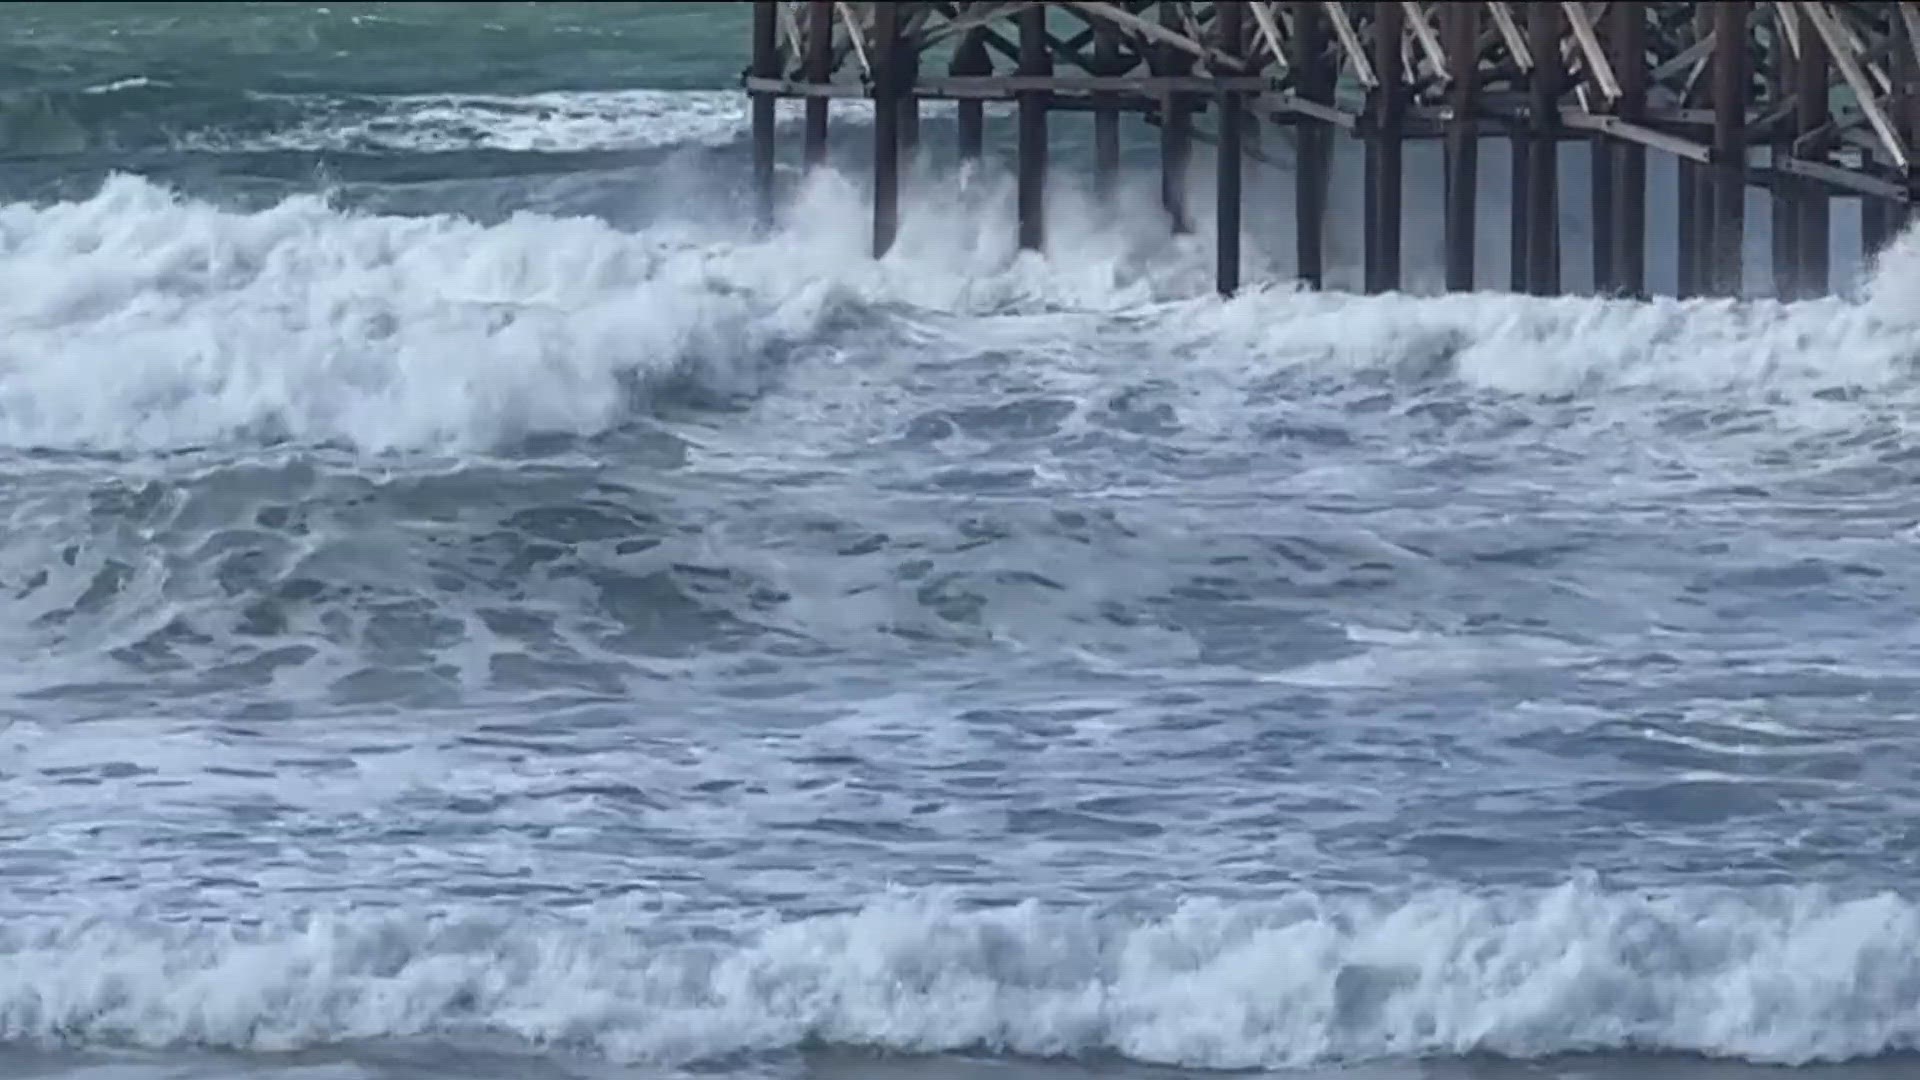 San Diego lifeguards ask people to stay away from the beaches on Sunday and Monday as storm moves through Southern California.